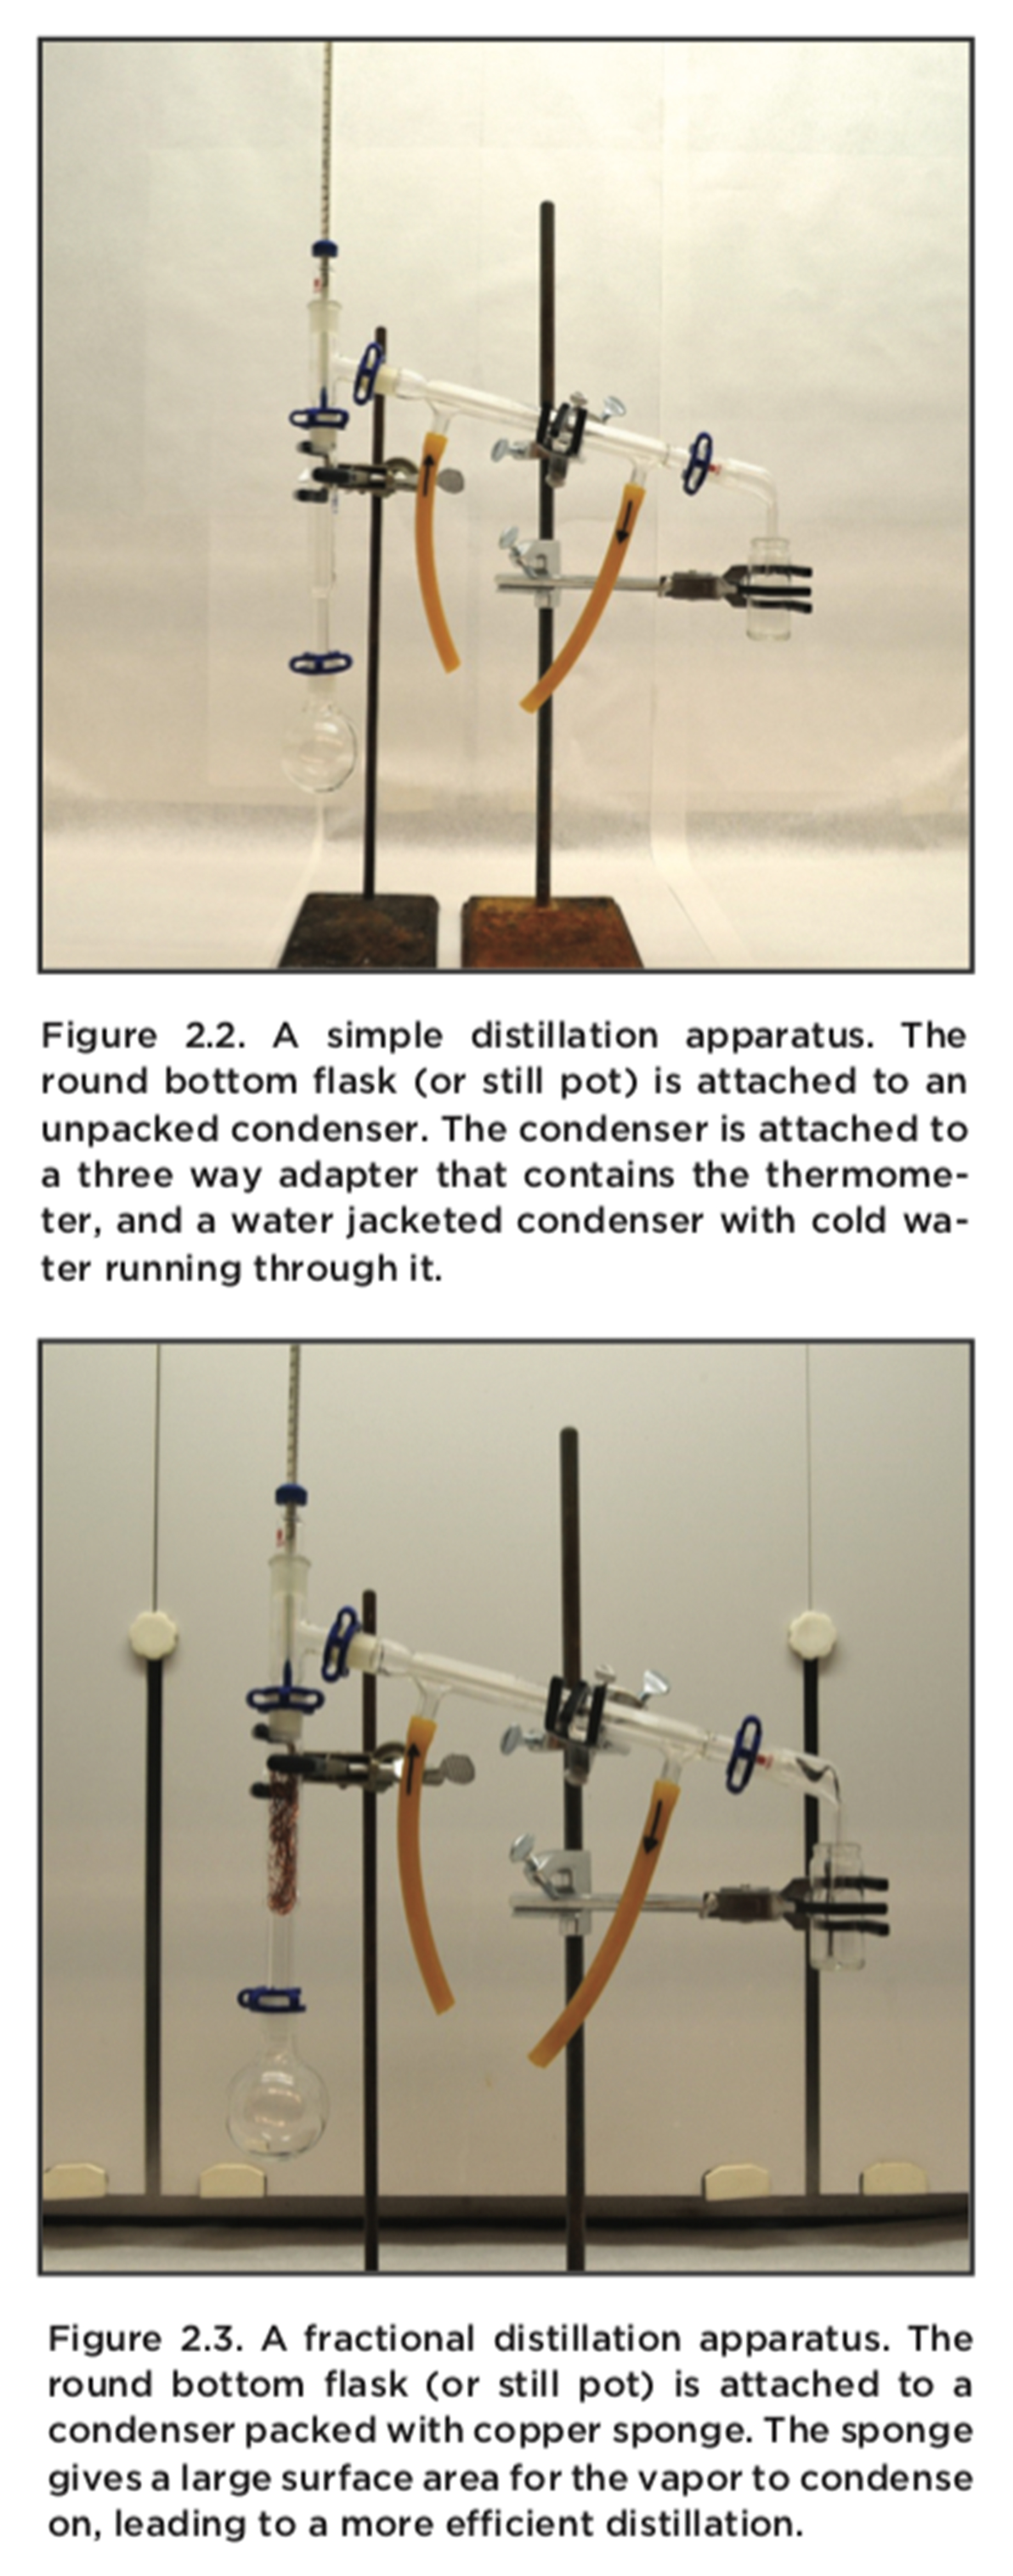 The top image shows a simple distillation apparatus. The round bottom flask (or still pot) is attached to an unpacked condenser. The condenser is attached to a three way adapter that contains the thermometer, and a water jacketed condenser with cold water running through it. The bottom image shows a fractional distillation apparatus. The round bottom flask (or still pot) is attached to a condenser packed with copper sponge. The sponge gives a large surface area for the vapor to condense on, leading to a more efficient distillation.